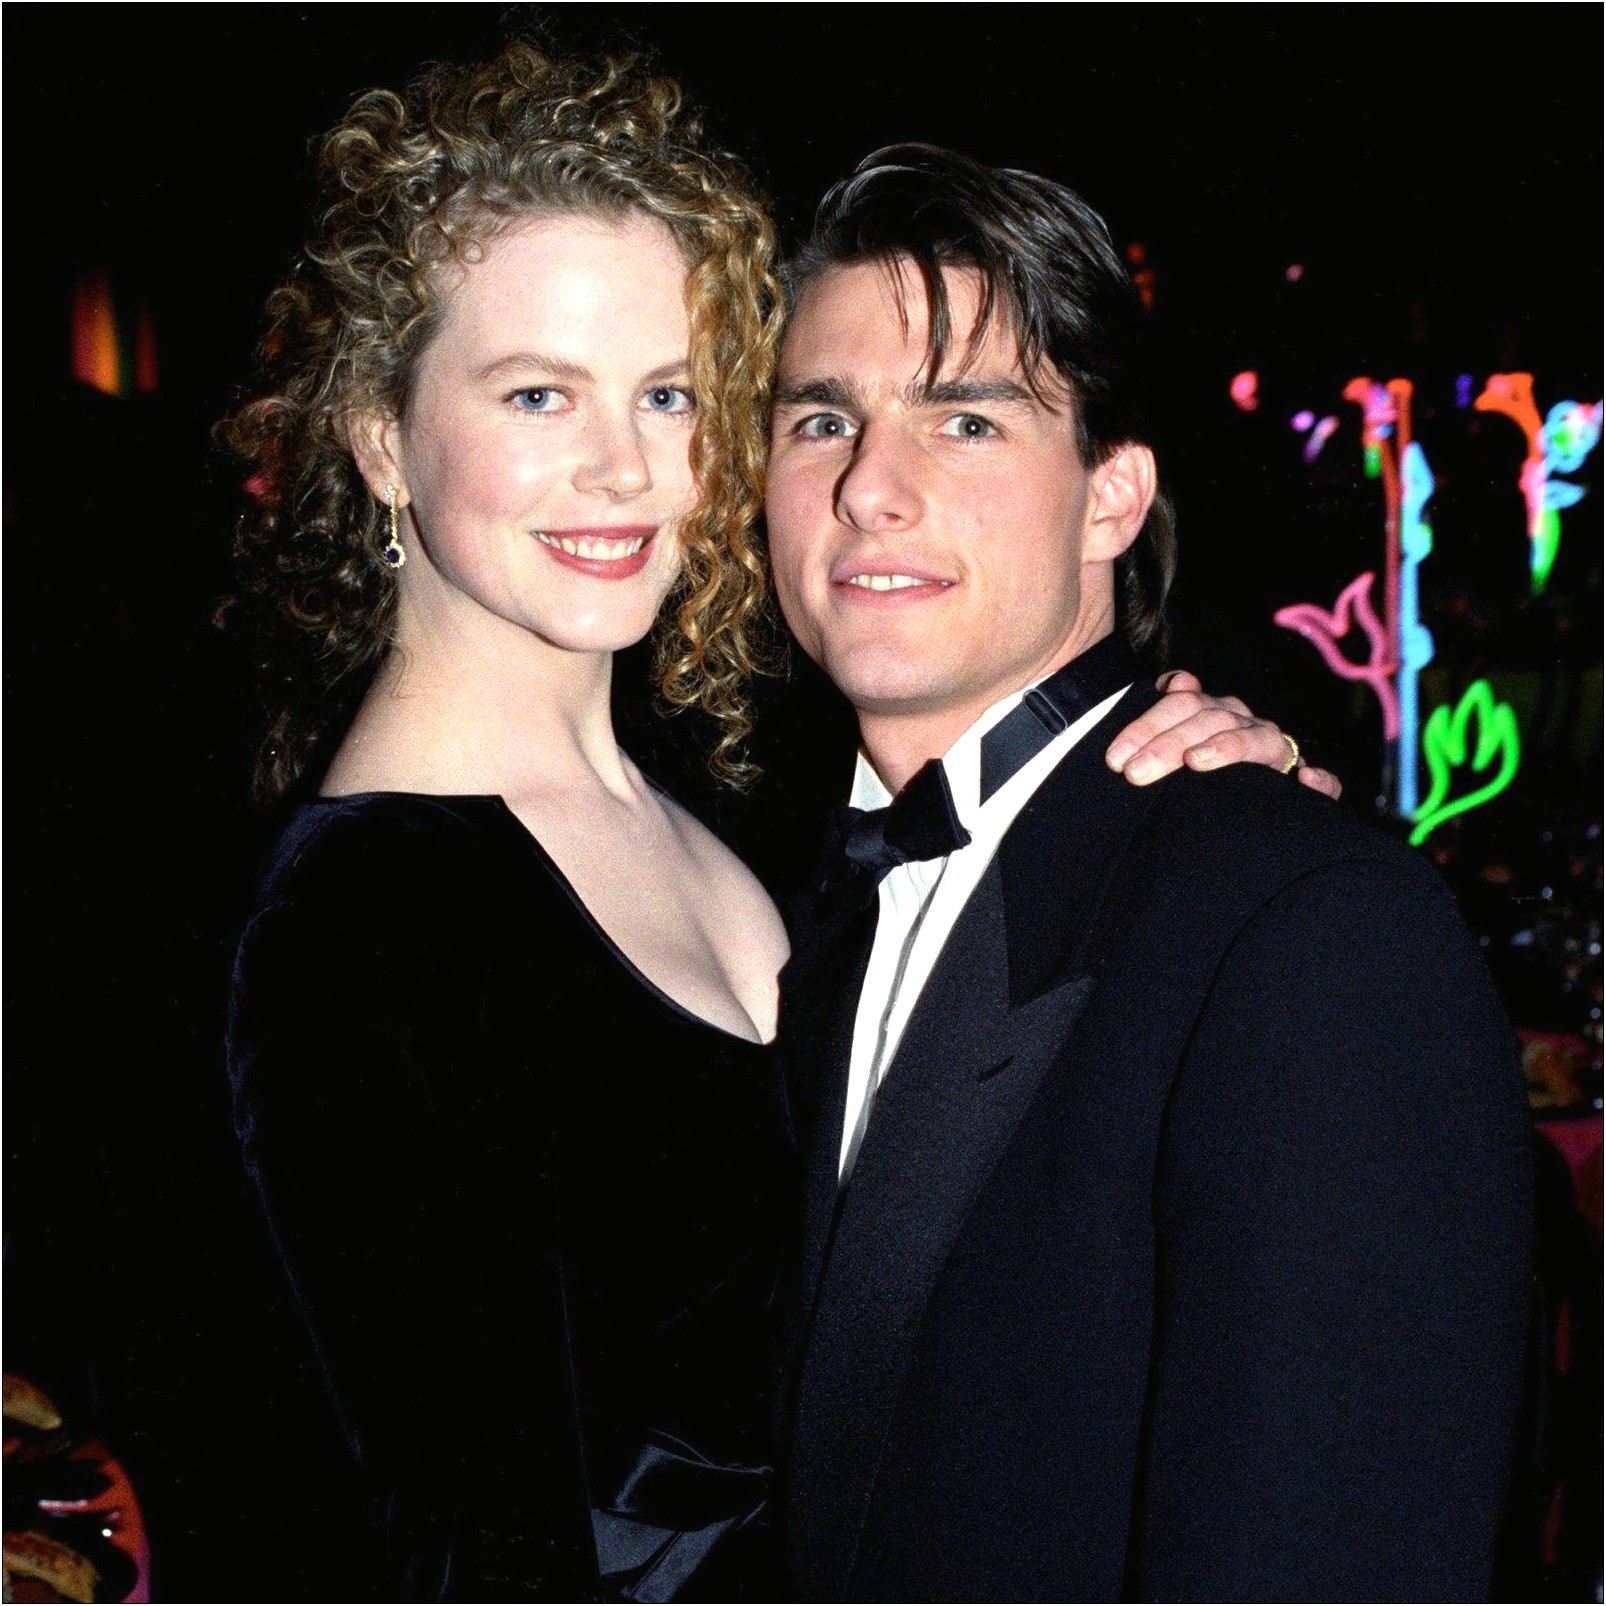 Is Tom Cruise Invited To Royal Wedding